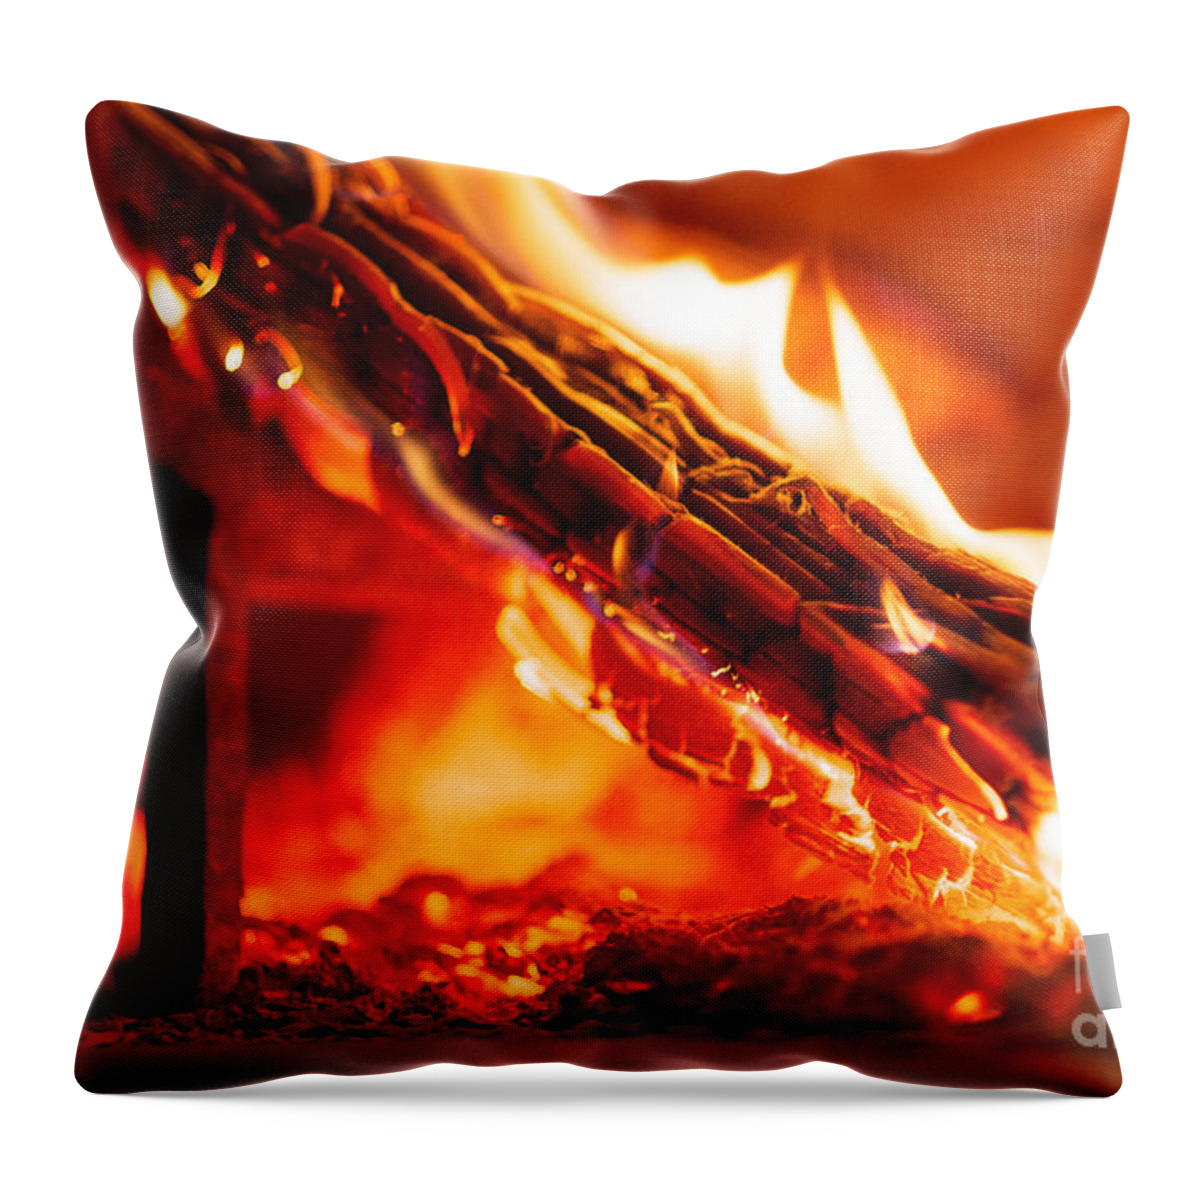 Brick Throw Pillow featuring the photograph Interior Of Wood Fired Brick Oven With Burning Log by JM Travel Photography